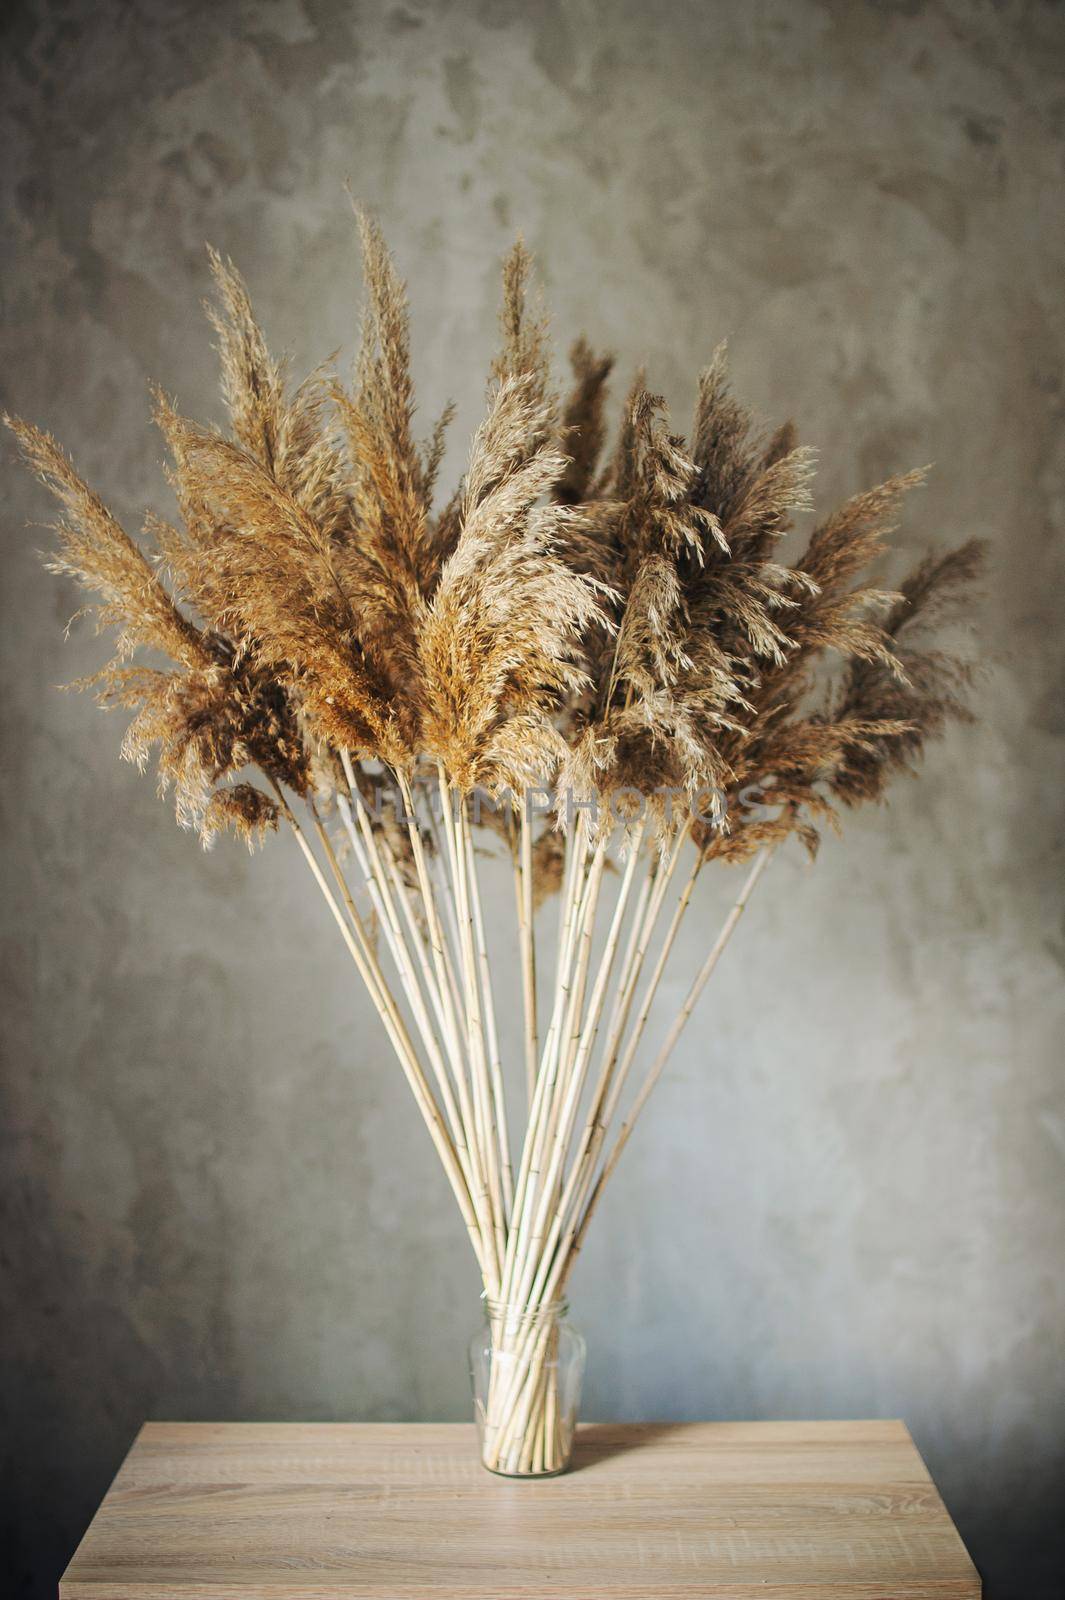 bouquet of dried flowers in brown tones stands on a wooden table in a room near a concrete wall in a loft style